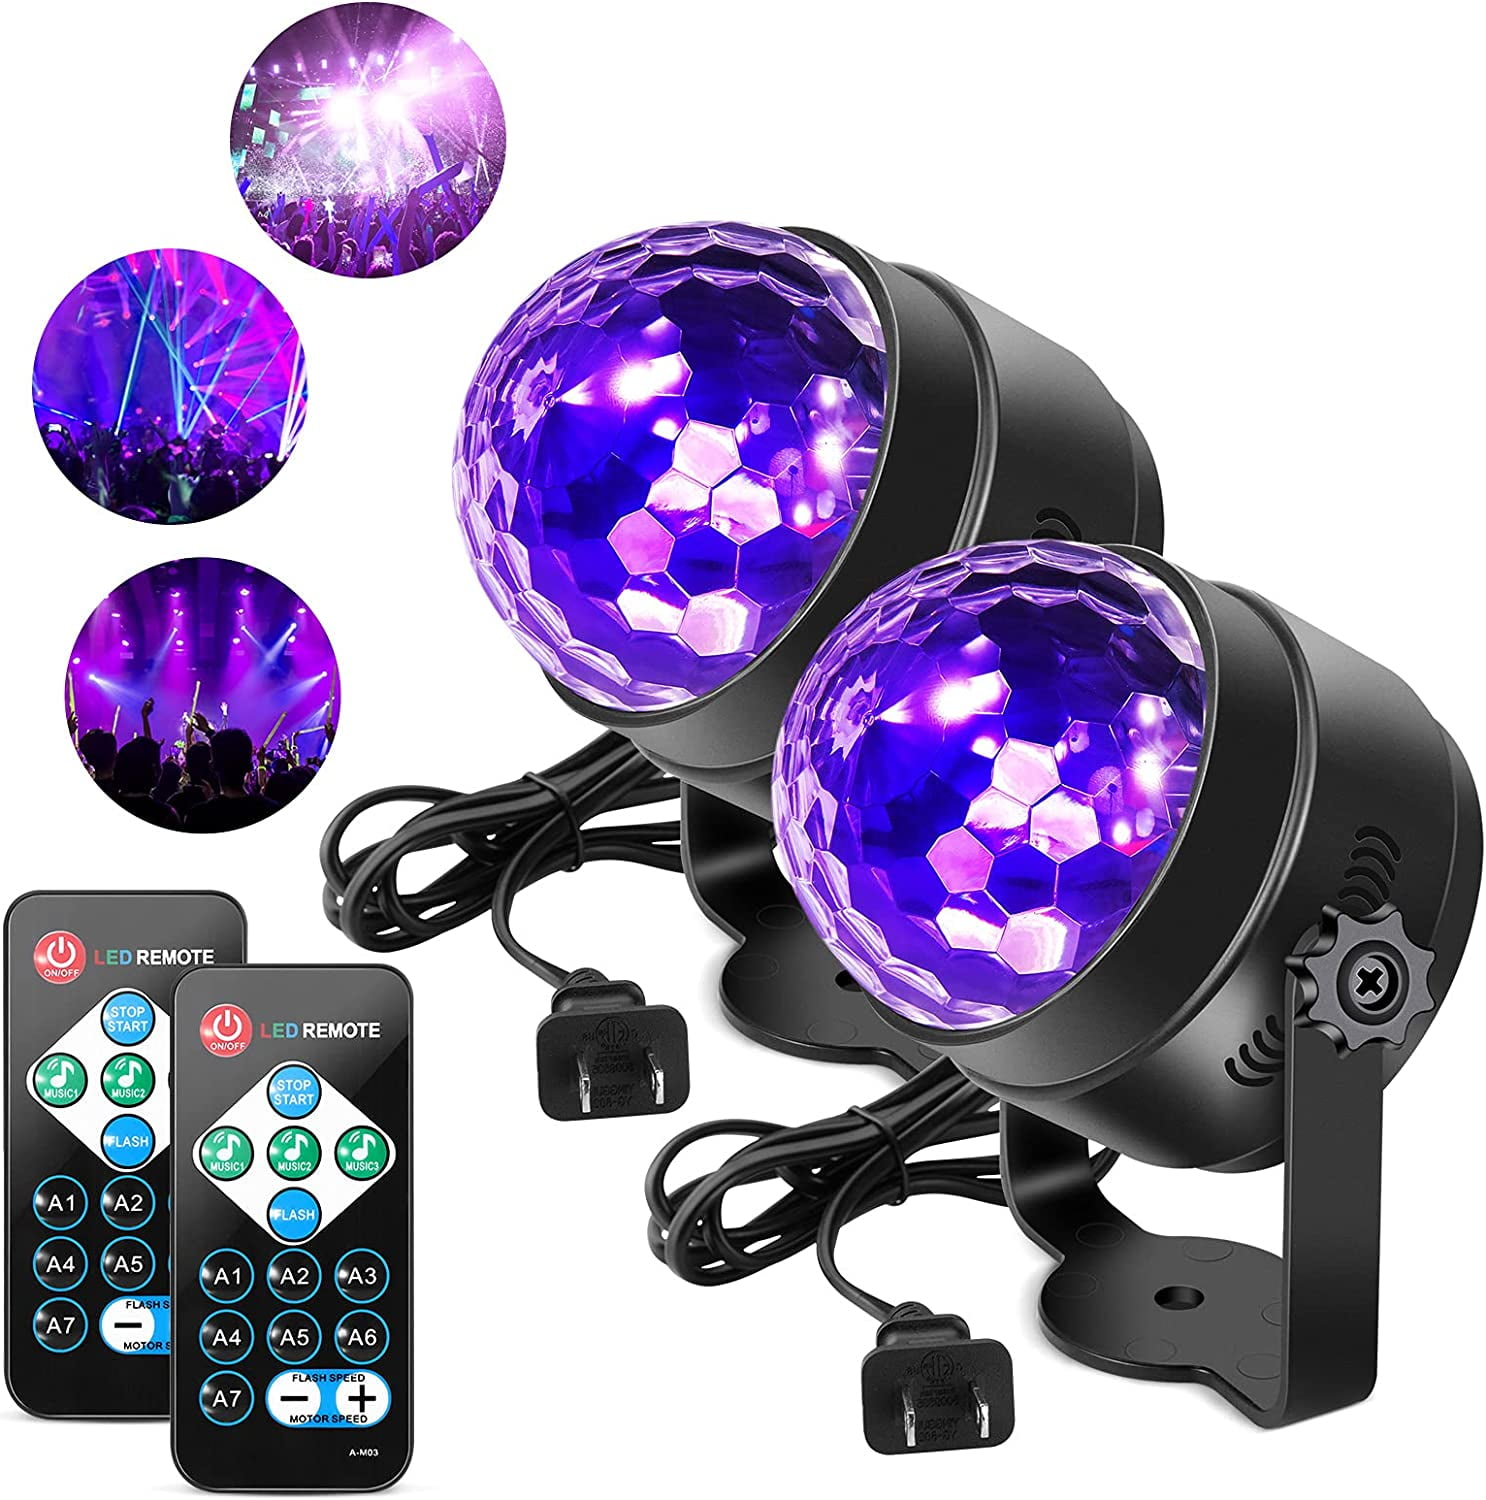 National anthem visitor Indirect Black Light 6W UV Light Disco Ball LED Party Lights Sound Activated with  Remote Control DJ Lighting, 7 Modes Stage Par Light for UV Party Halloween  Decorations Birthday Party DJ Bar Xmas(2